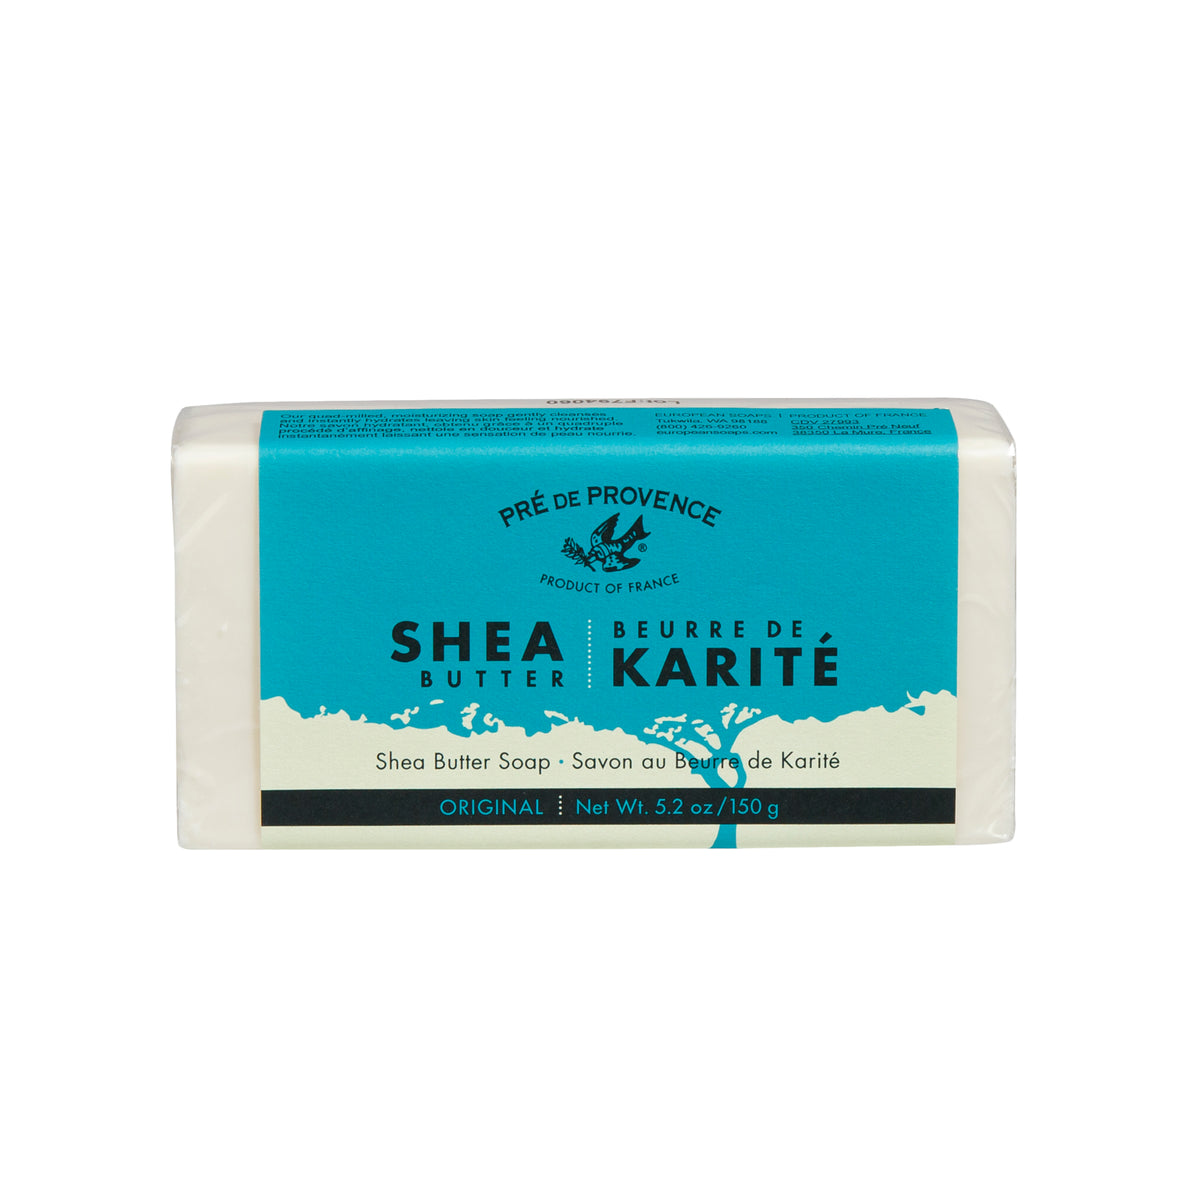 Primary Image of Shea Butter Hand Cut Soap